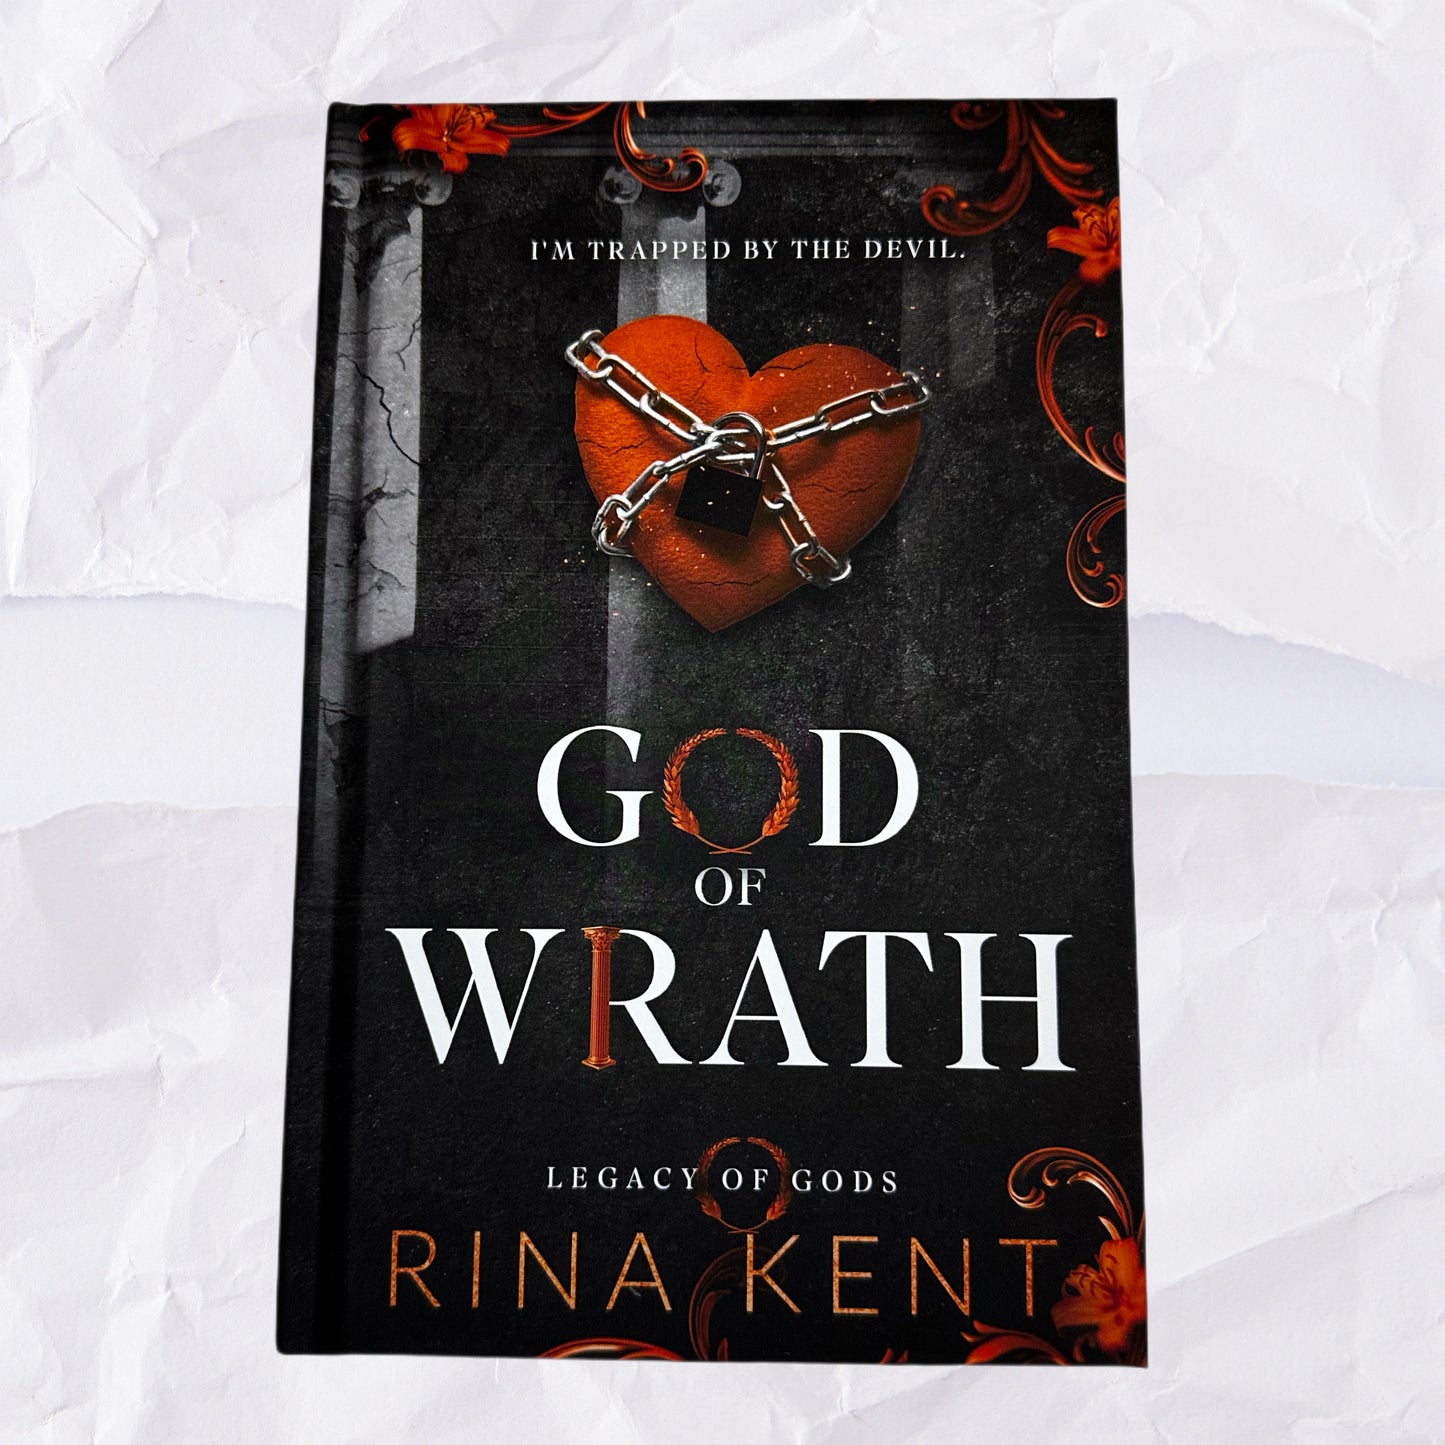 God of Wrath (Legacy of Gods #3) by Rina Kent - Special Edition Print - Hardcover